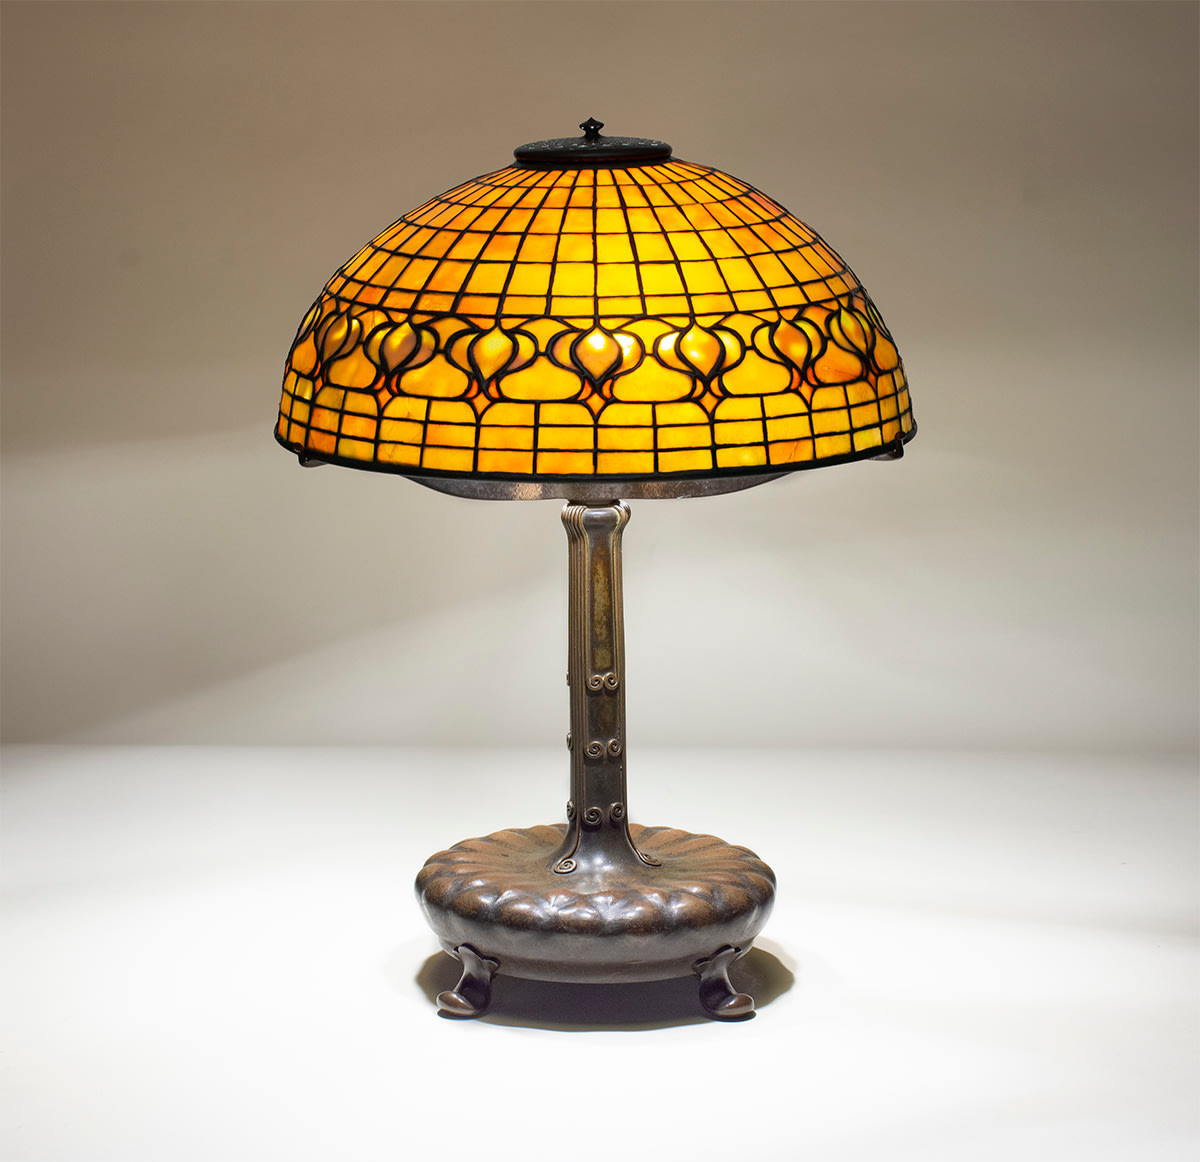 a leaded glass geometric tiffany lamp, the shade in orange tiffany glass depicting stylized pomegranates against a gridded glass backgound